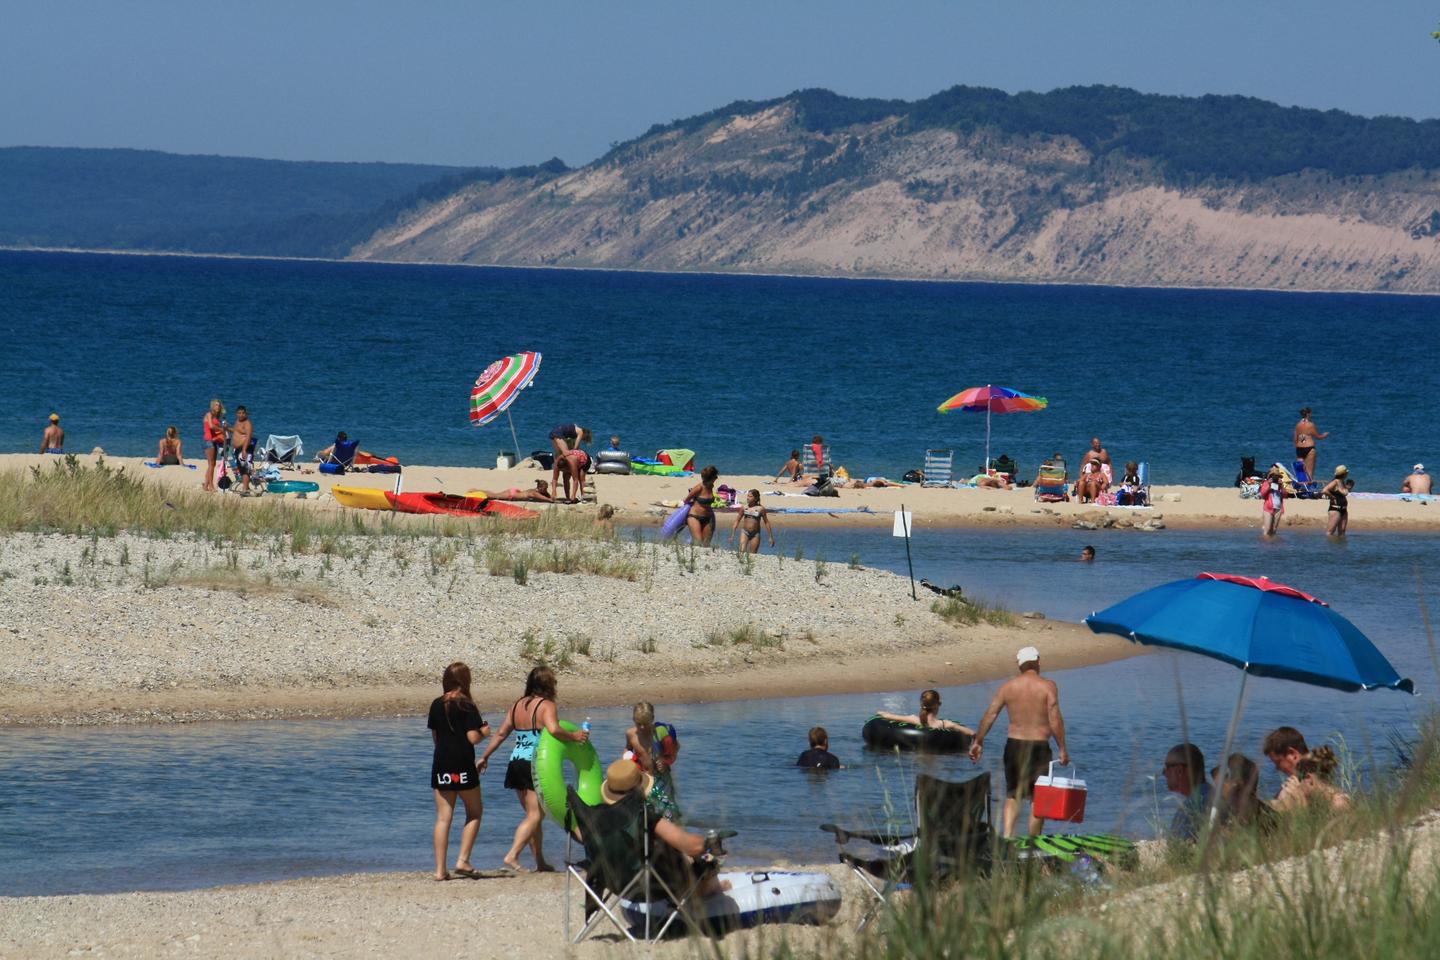 A perfect beach day at Platte River PointBright-colored umbrellas, bathing suits and floats make a festive day at the beach